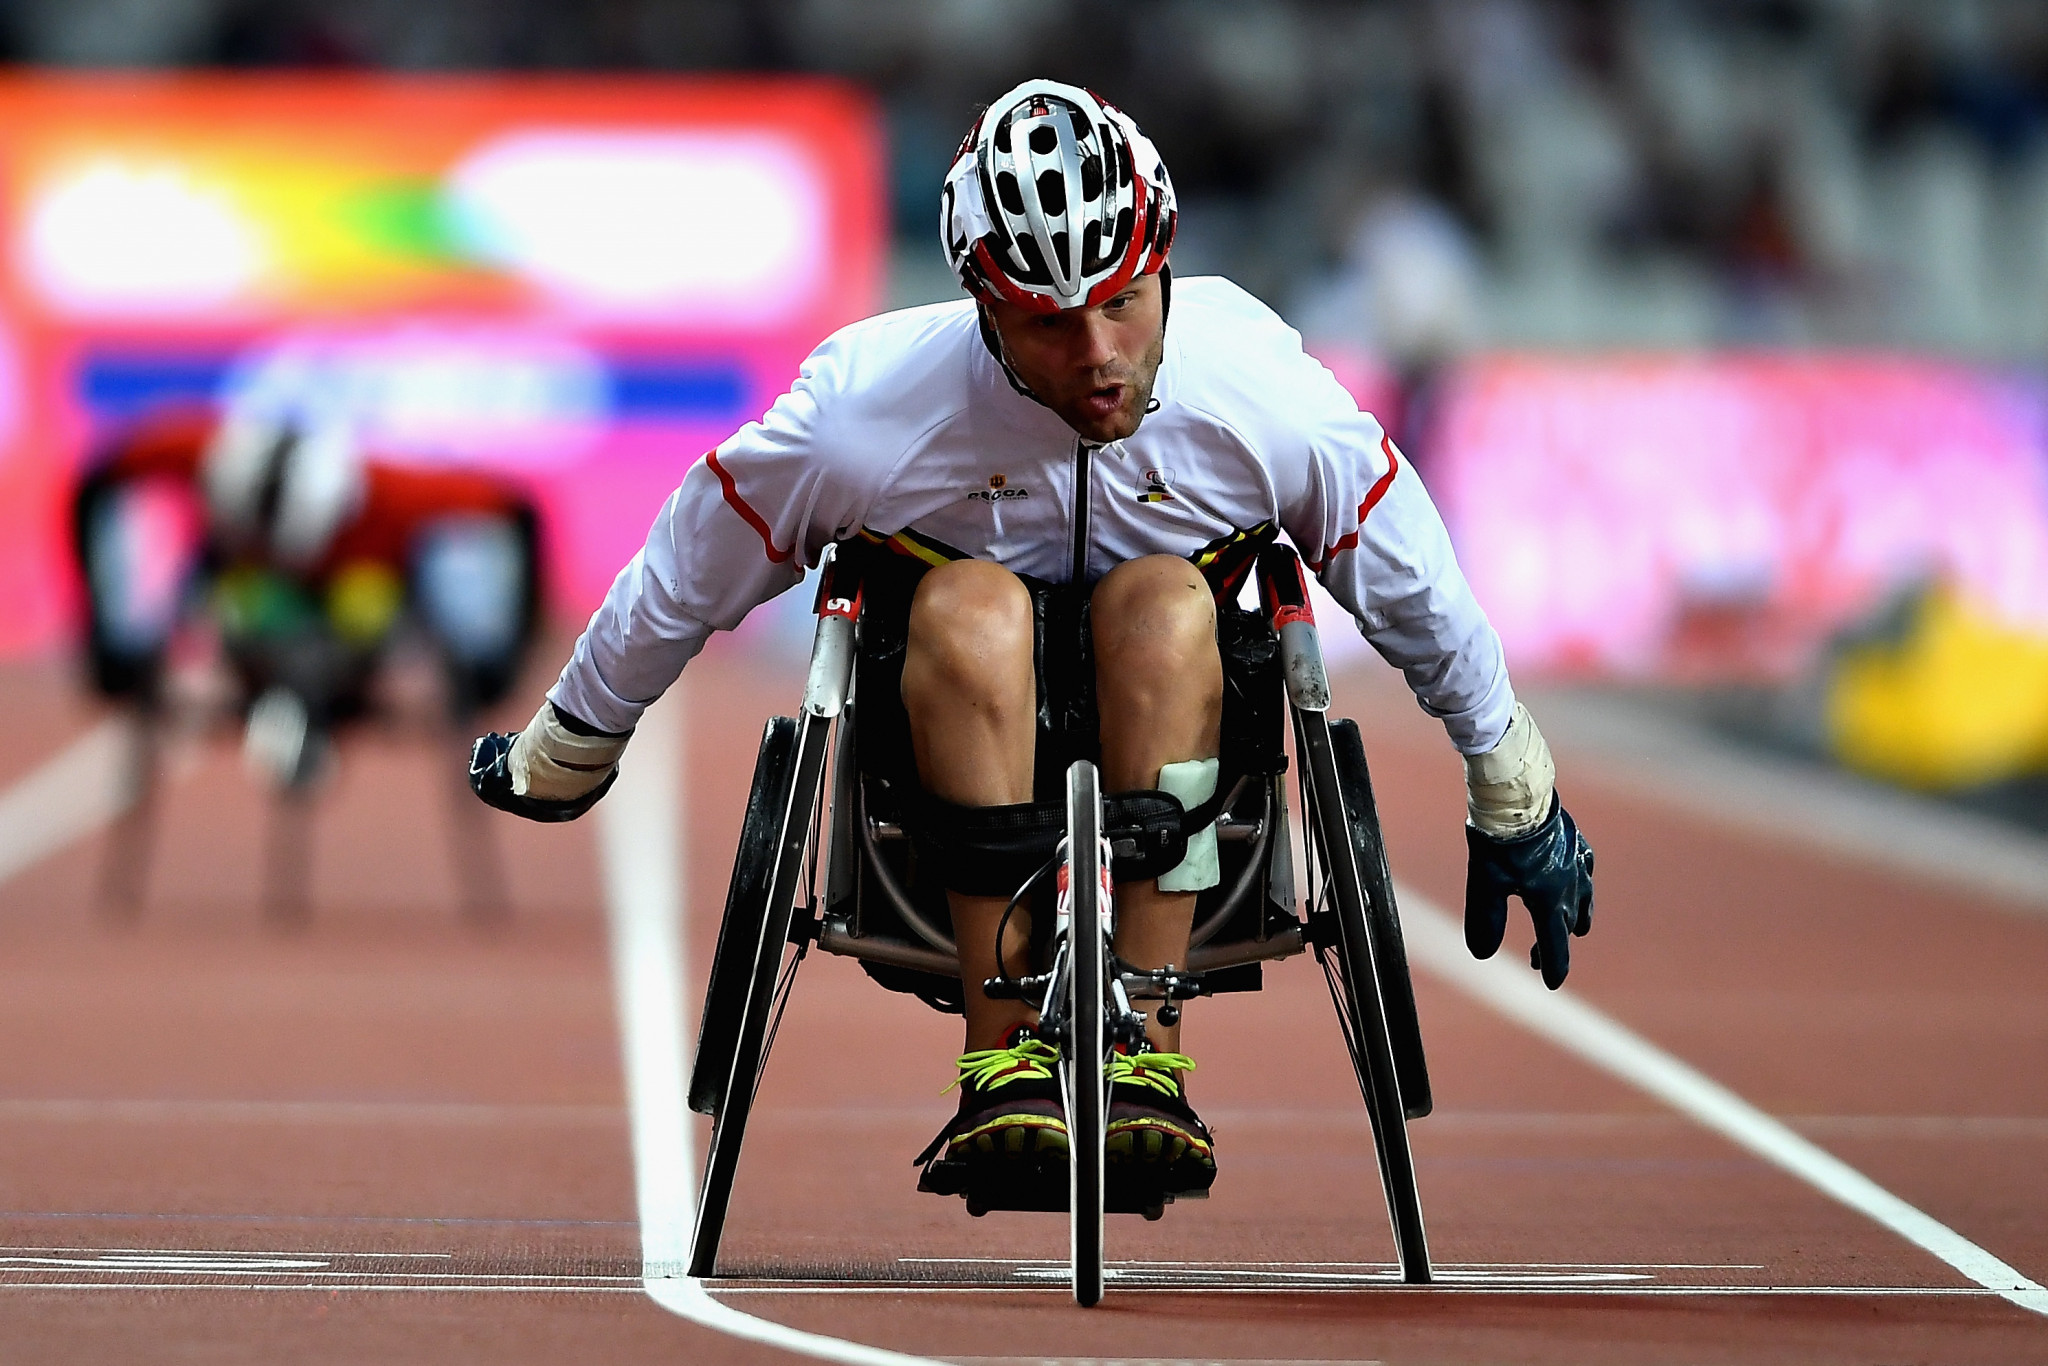 Belgium's Genyn breaks another world record as action concludes at World Para Athletics Grand Prix in Nottwil